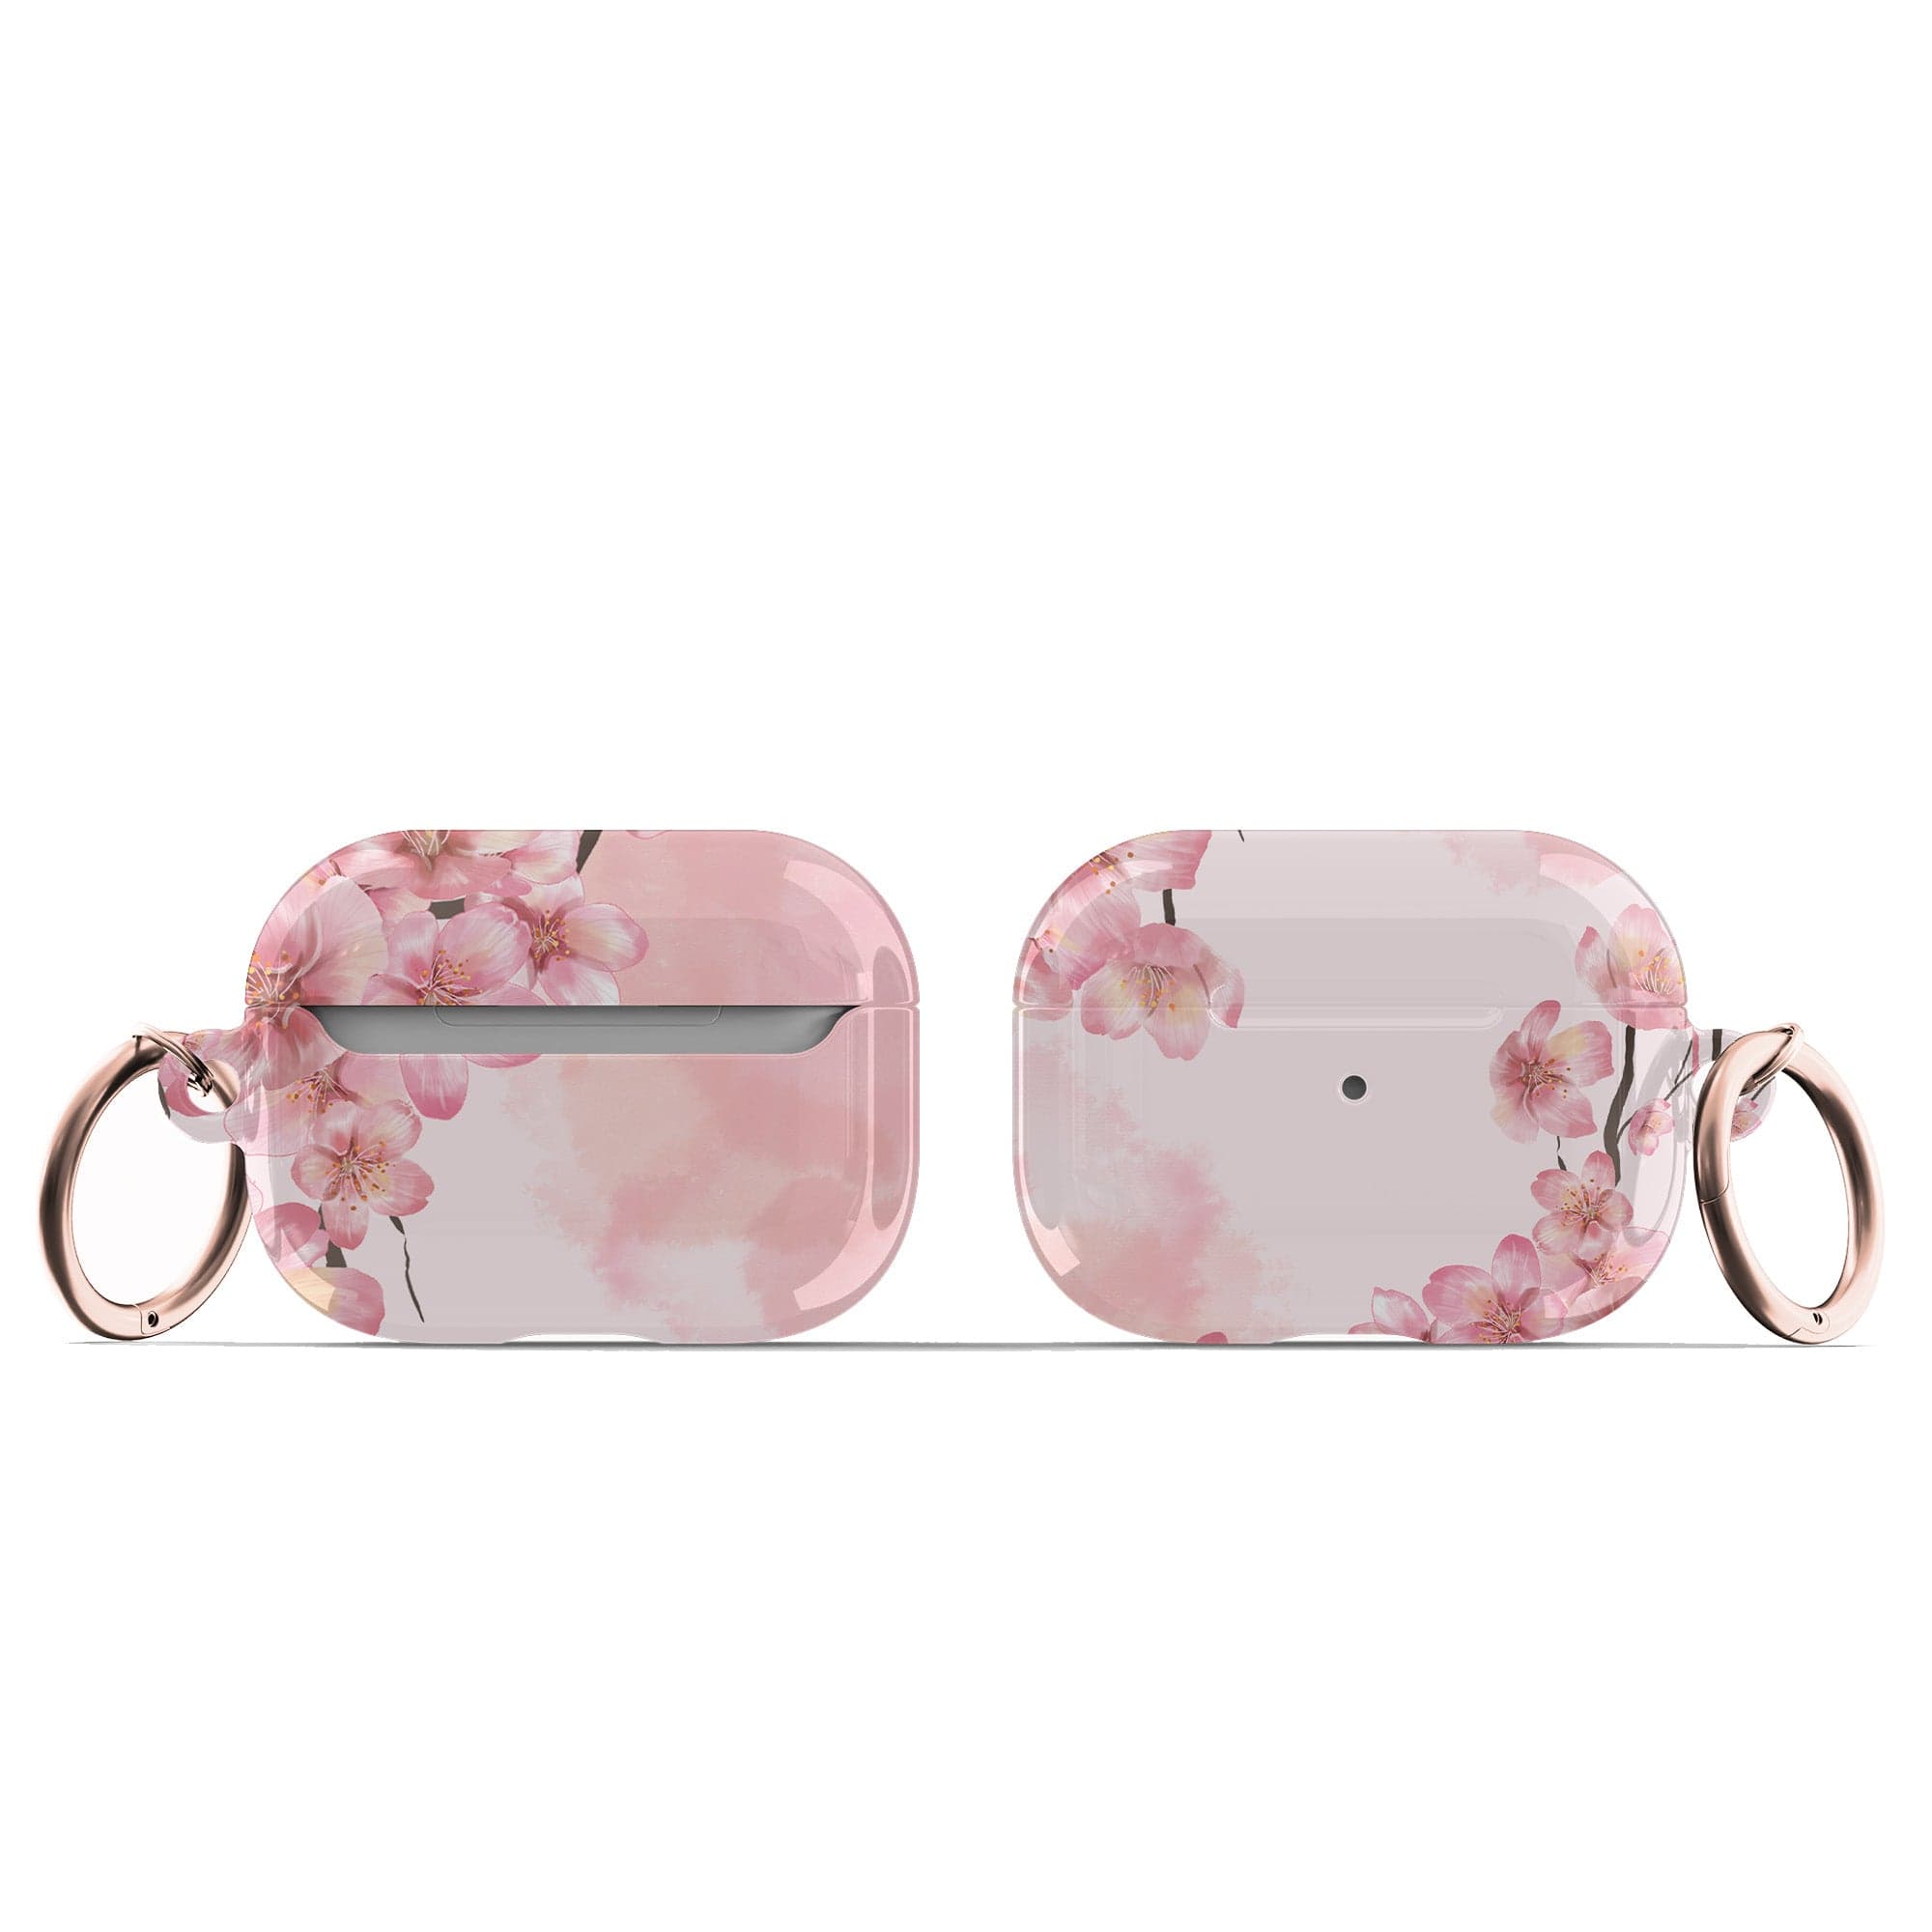 Spring Blush | Cherry Blossoms Floral Apple AirPods Case